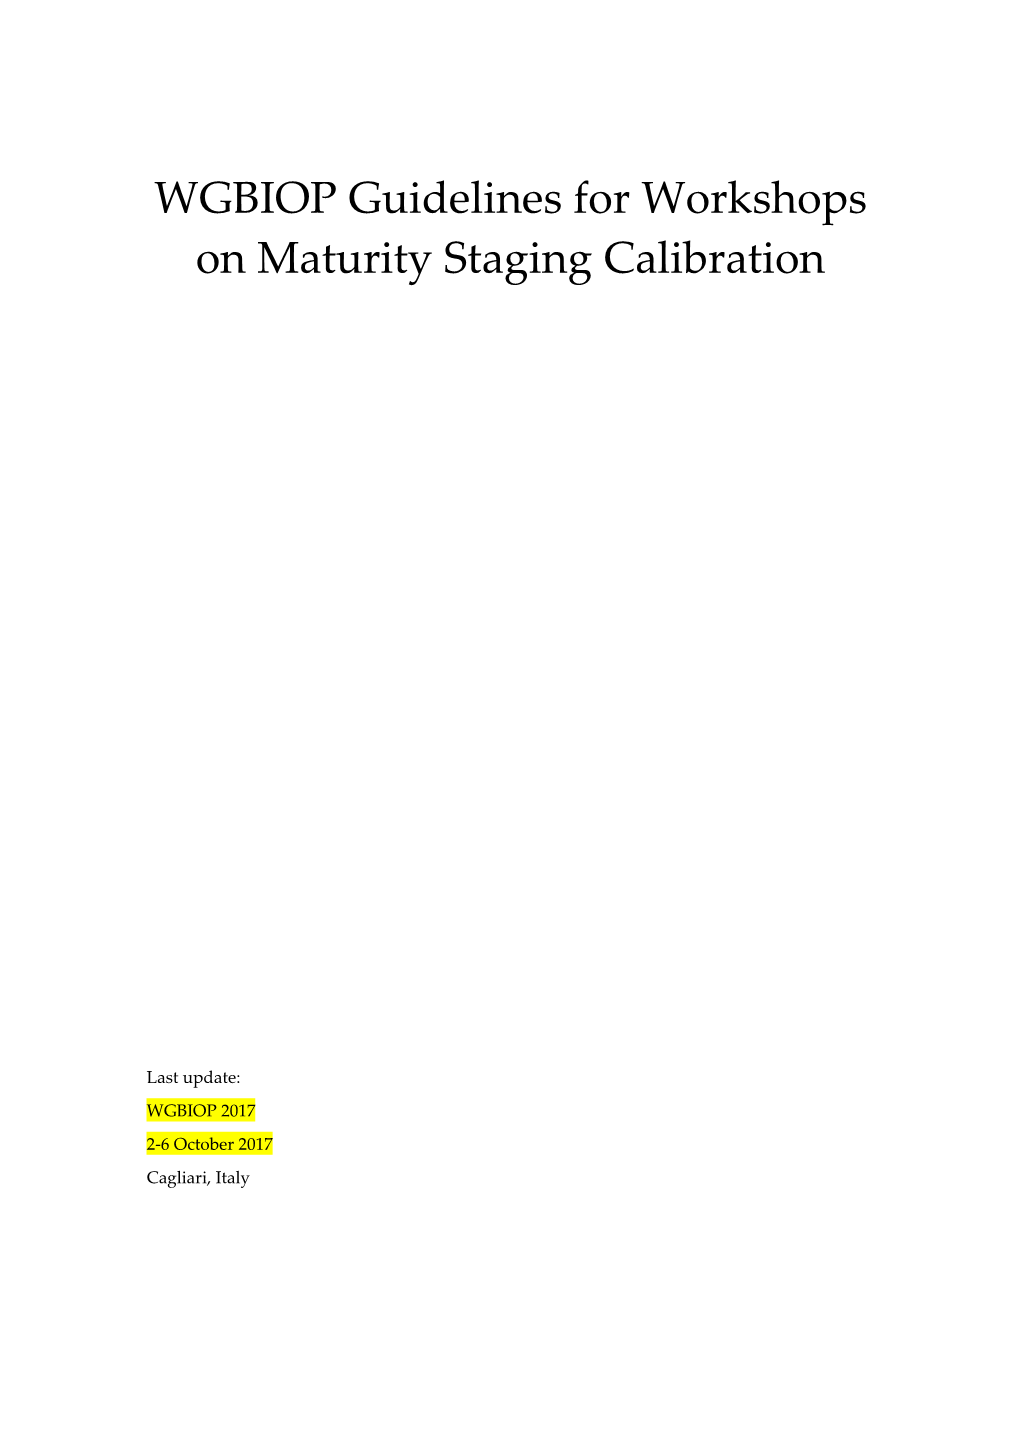 WGBIOP Guidelines for Workshops on Maturitystaging Calibration